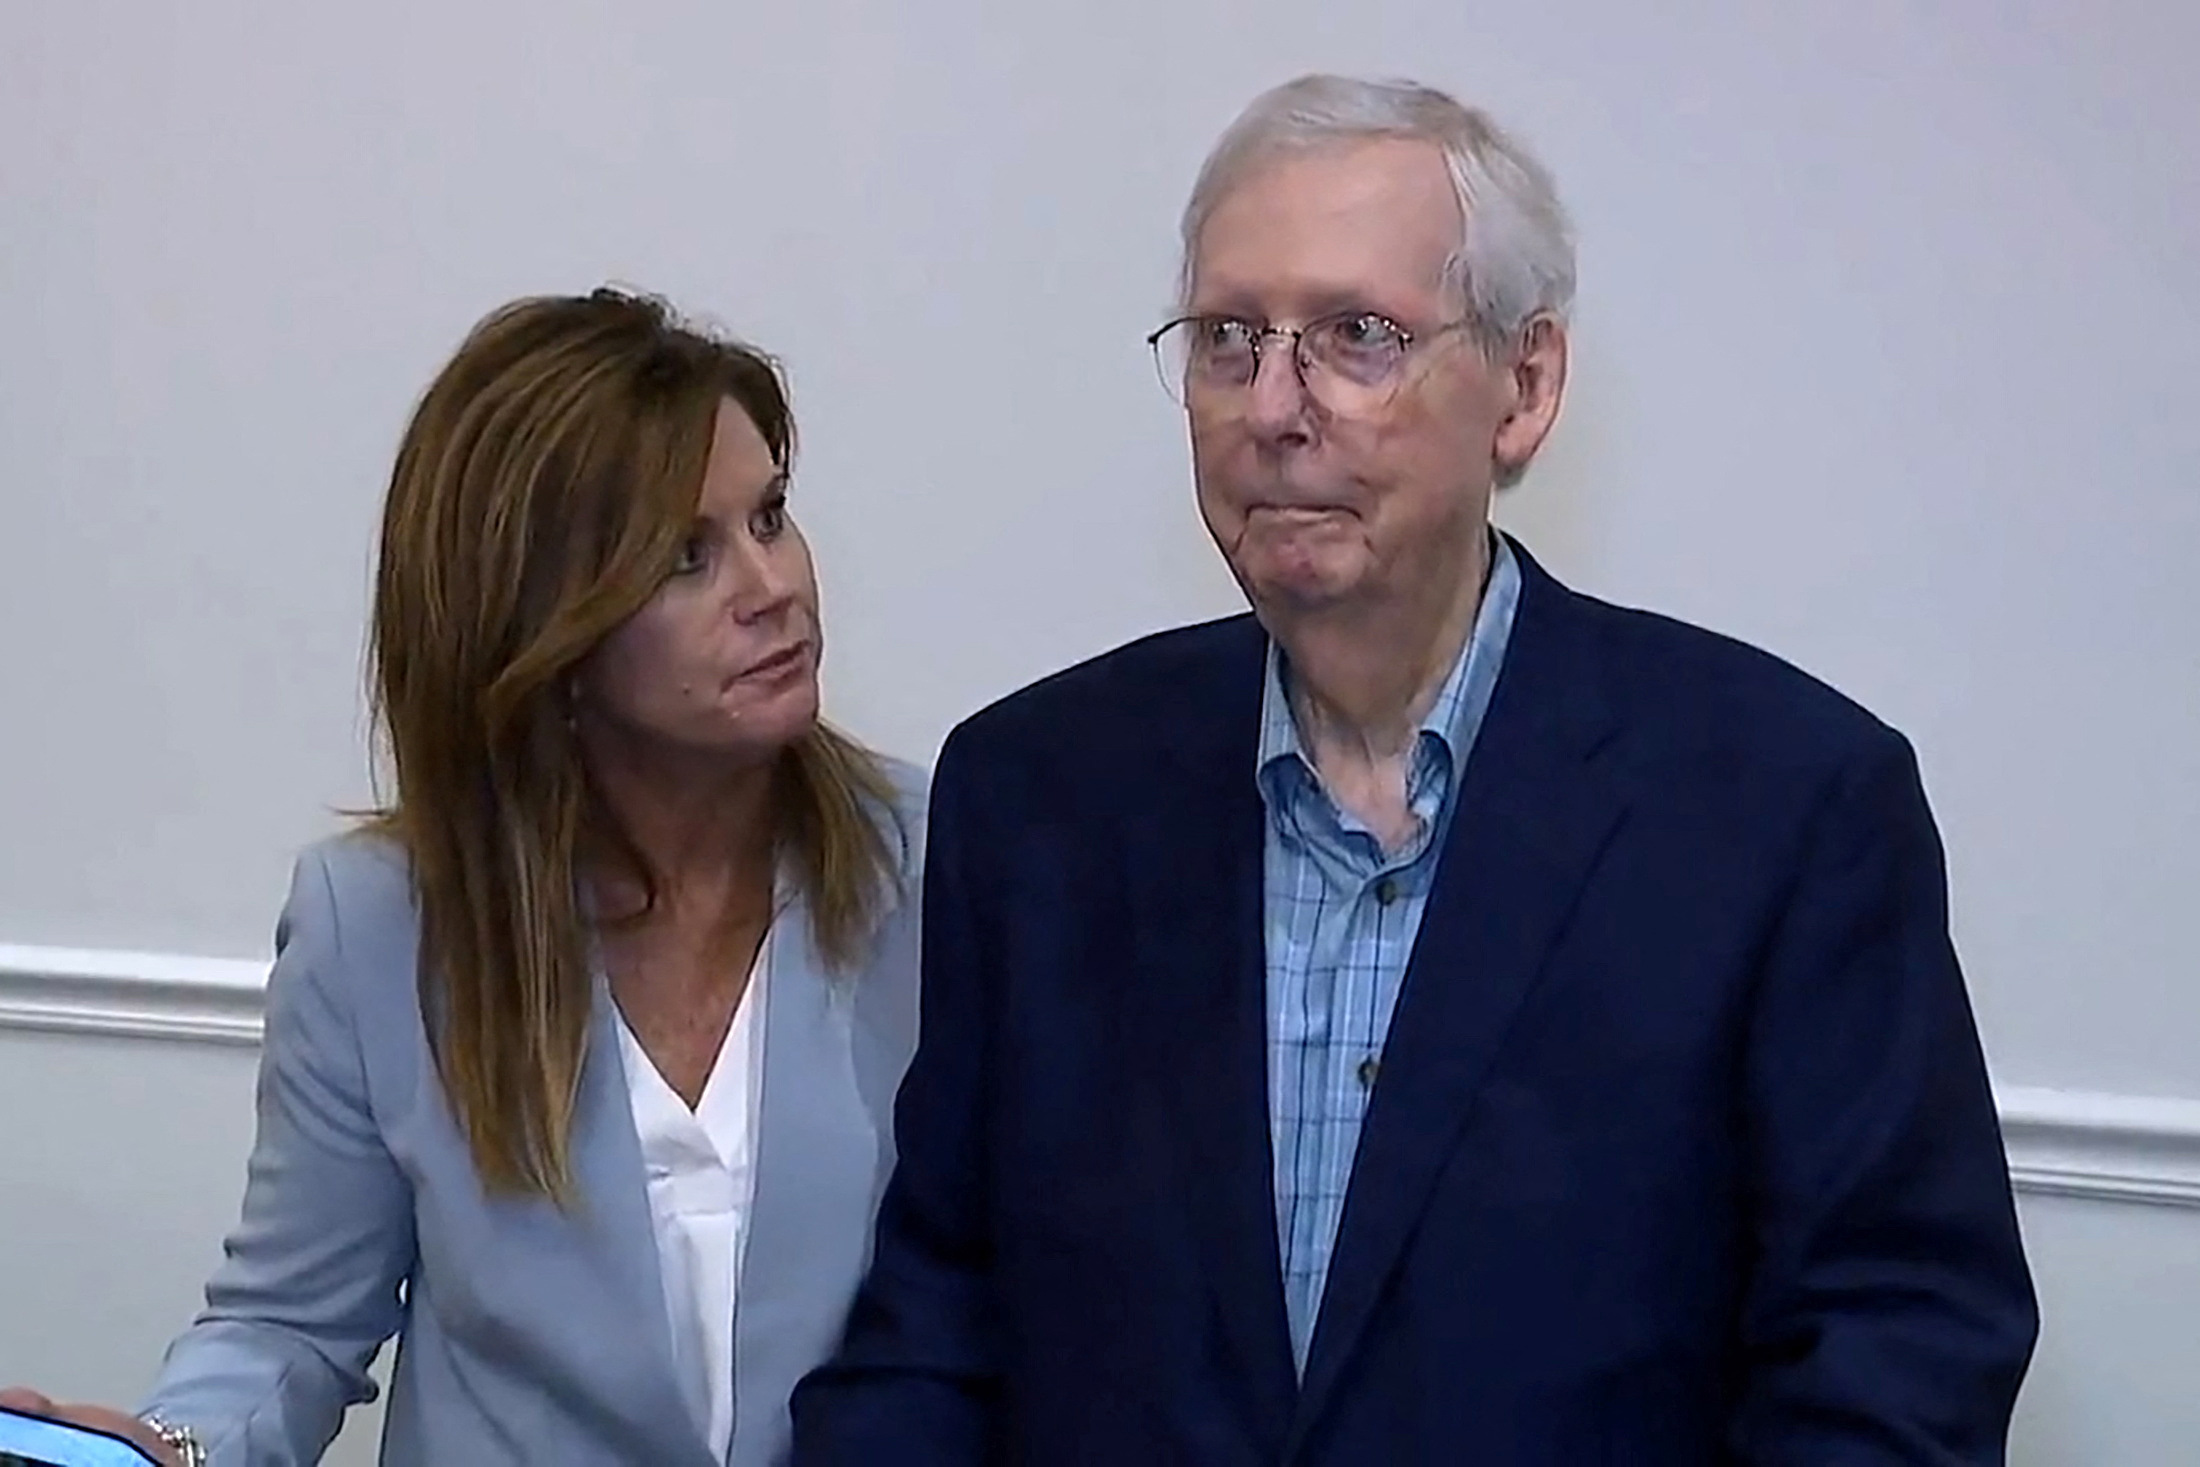 Senate GOP leader Mitch McConnell appears to freeze up again, this time